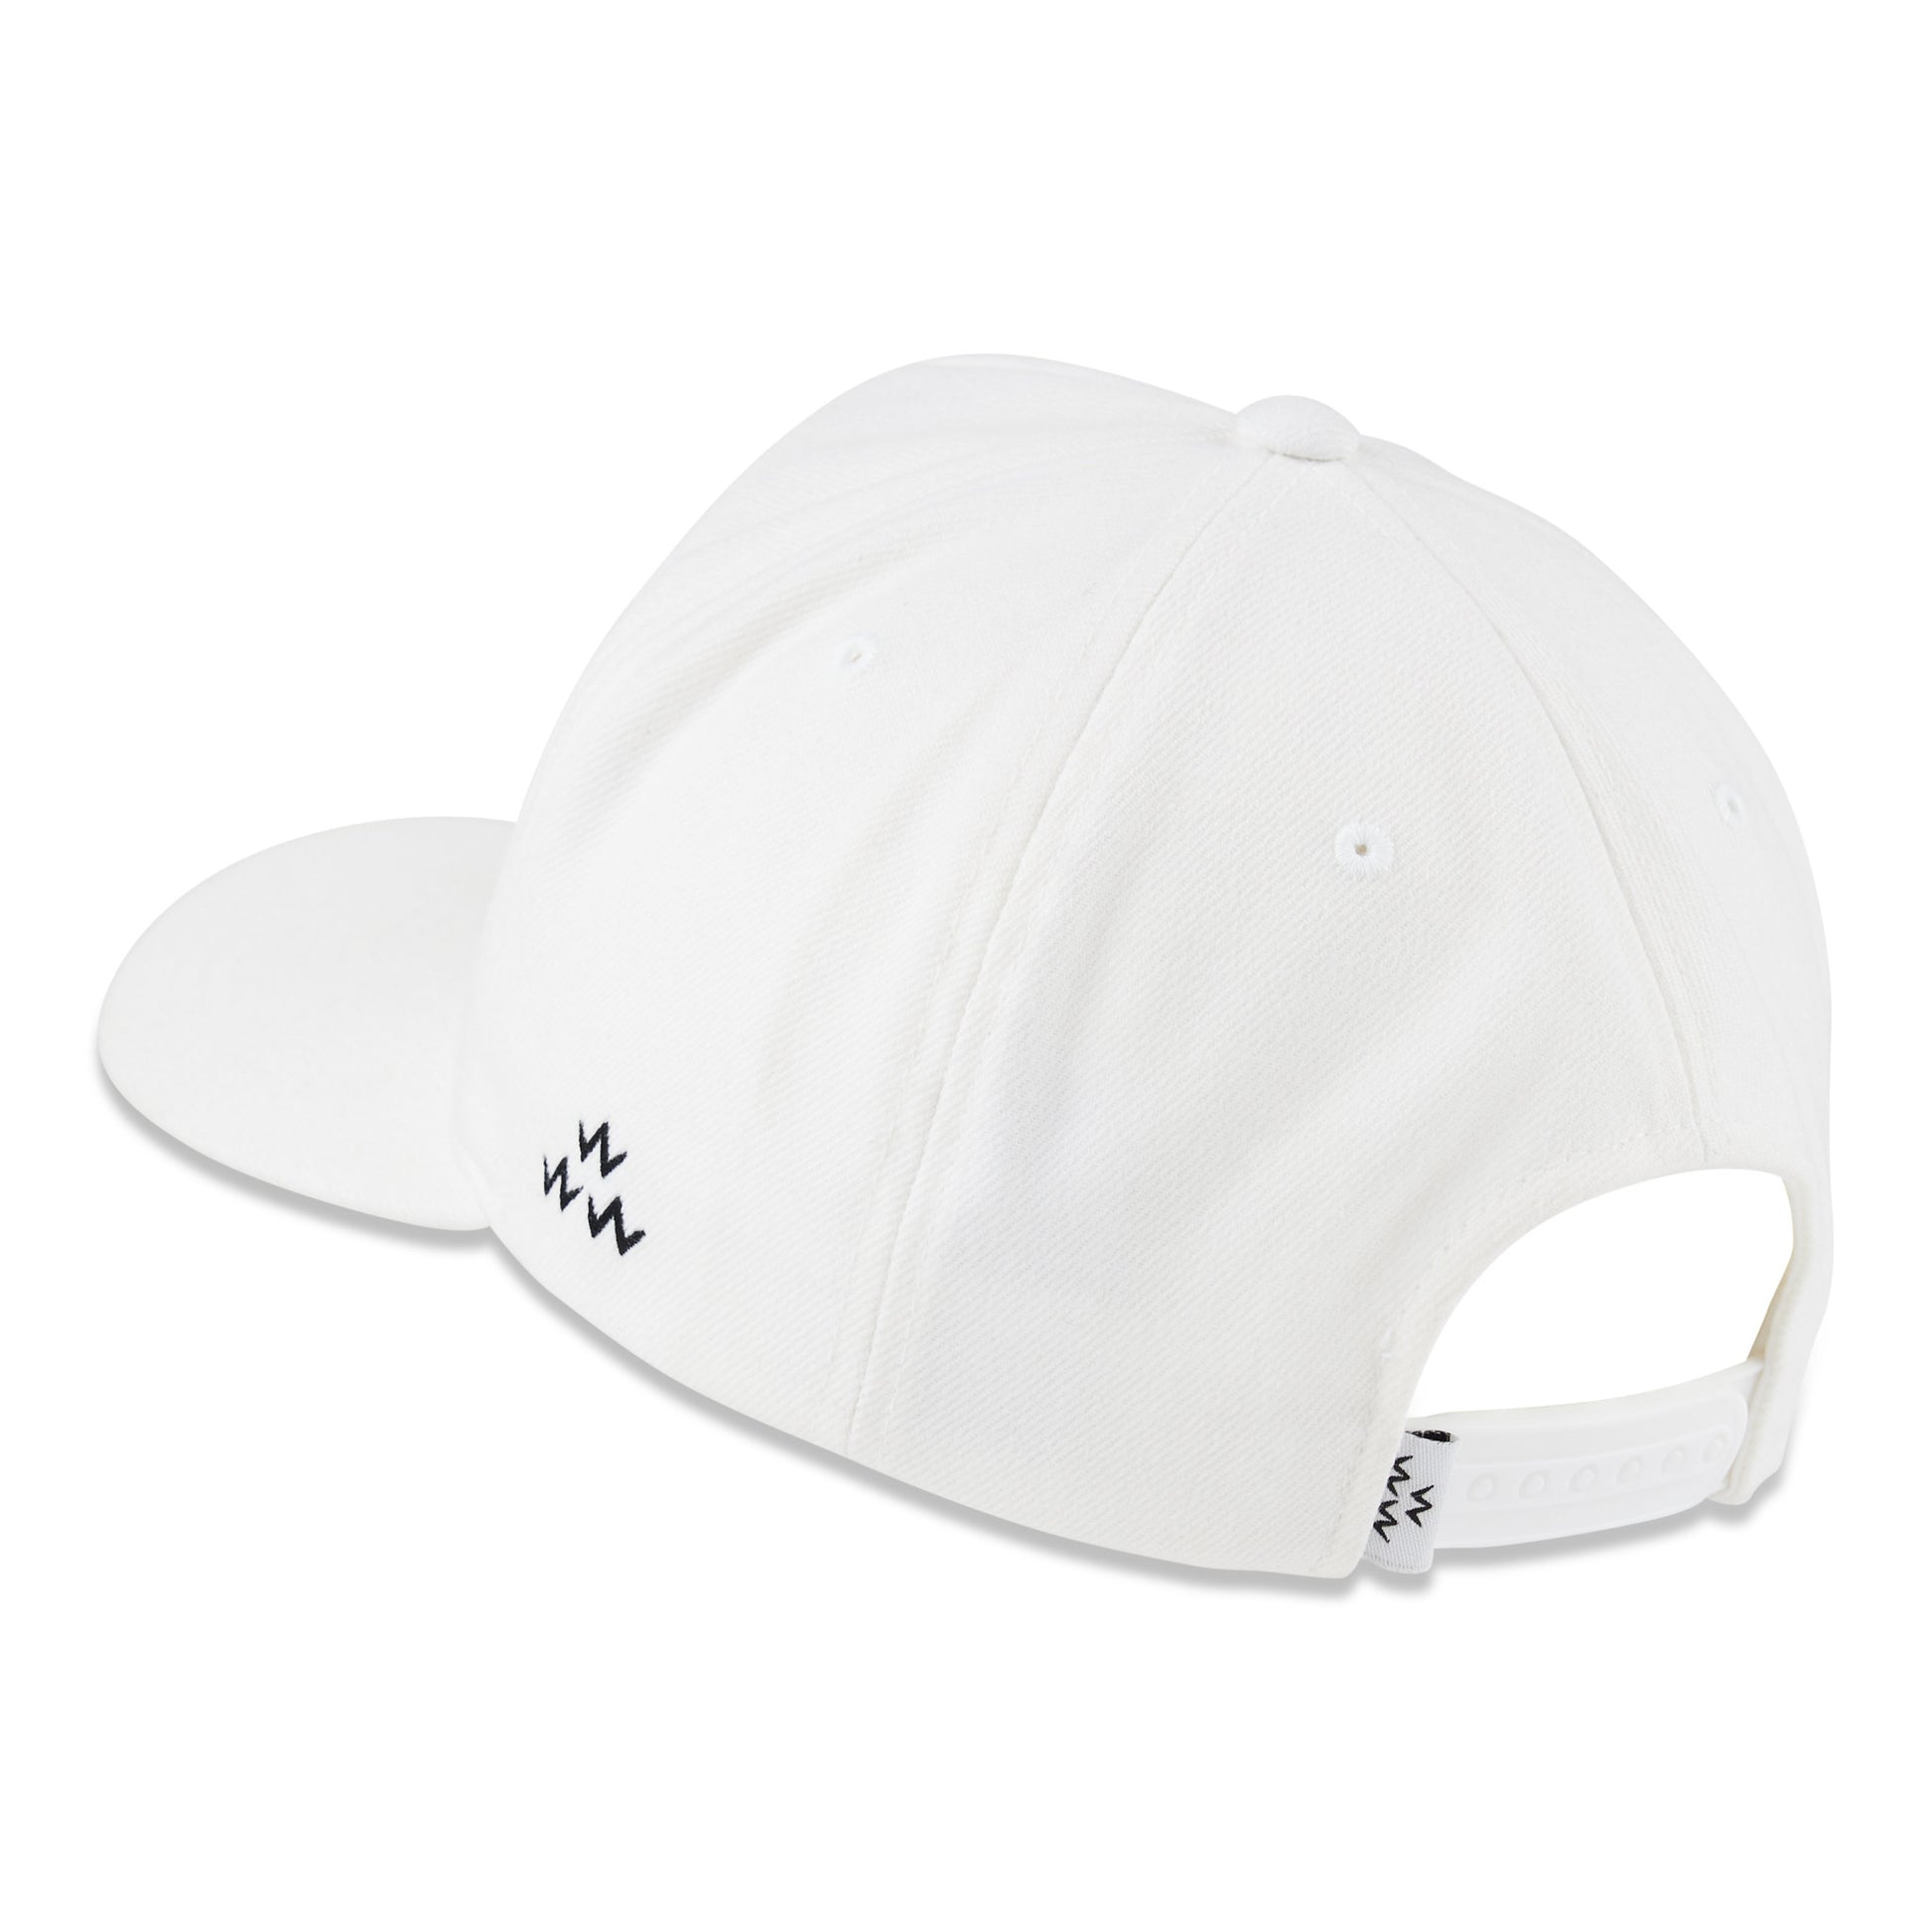 birds-of-condor-white-you-me-golf-now-snapback-hat-back